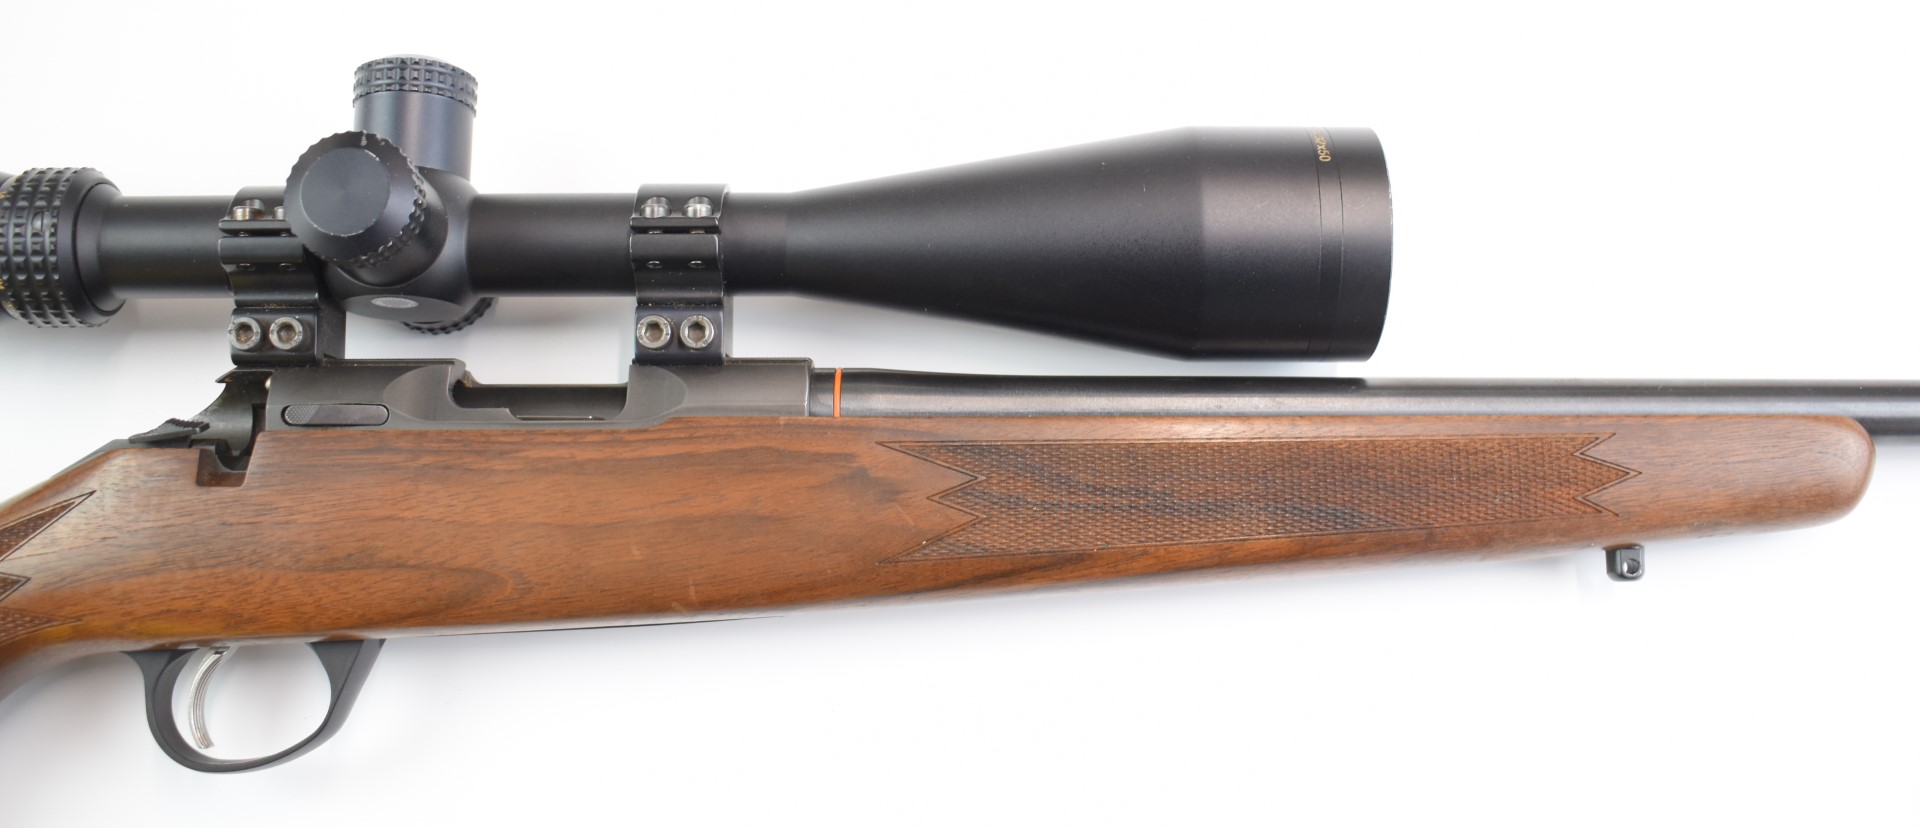 Sako P04R .17 bolt-action rifle with chequered semi-pistol grip and forend, raised cheek piece, - Image 26 of 26